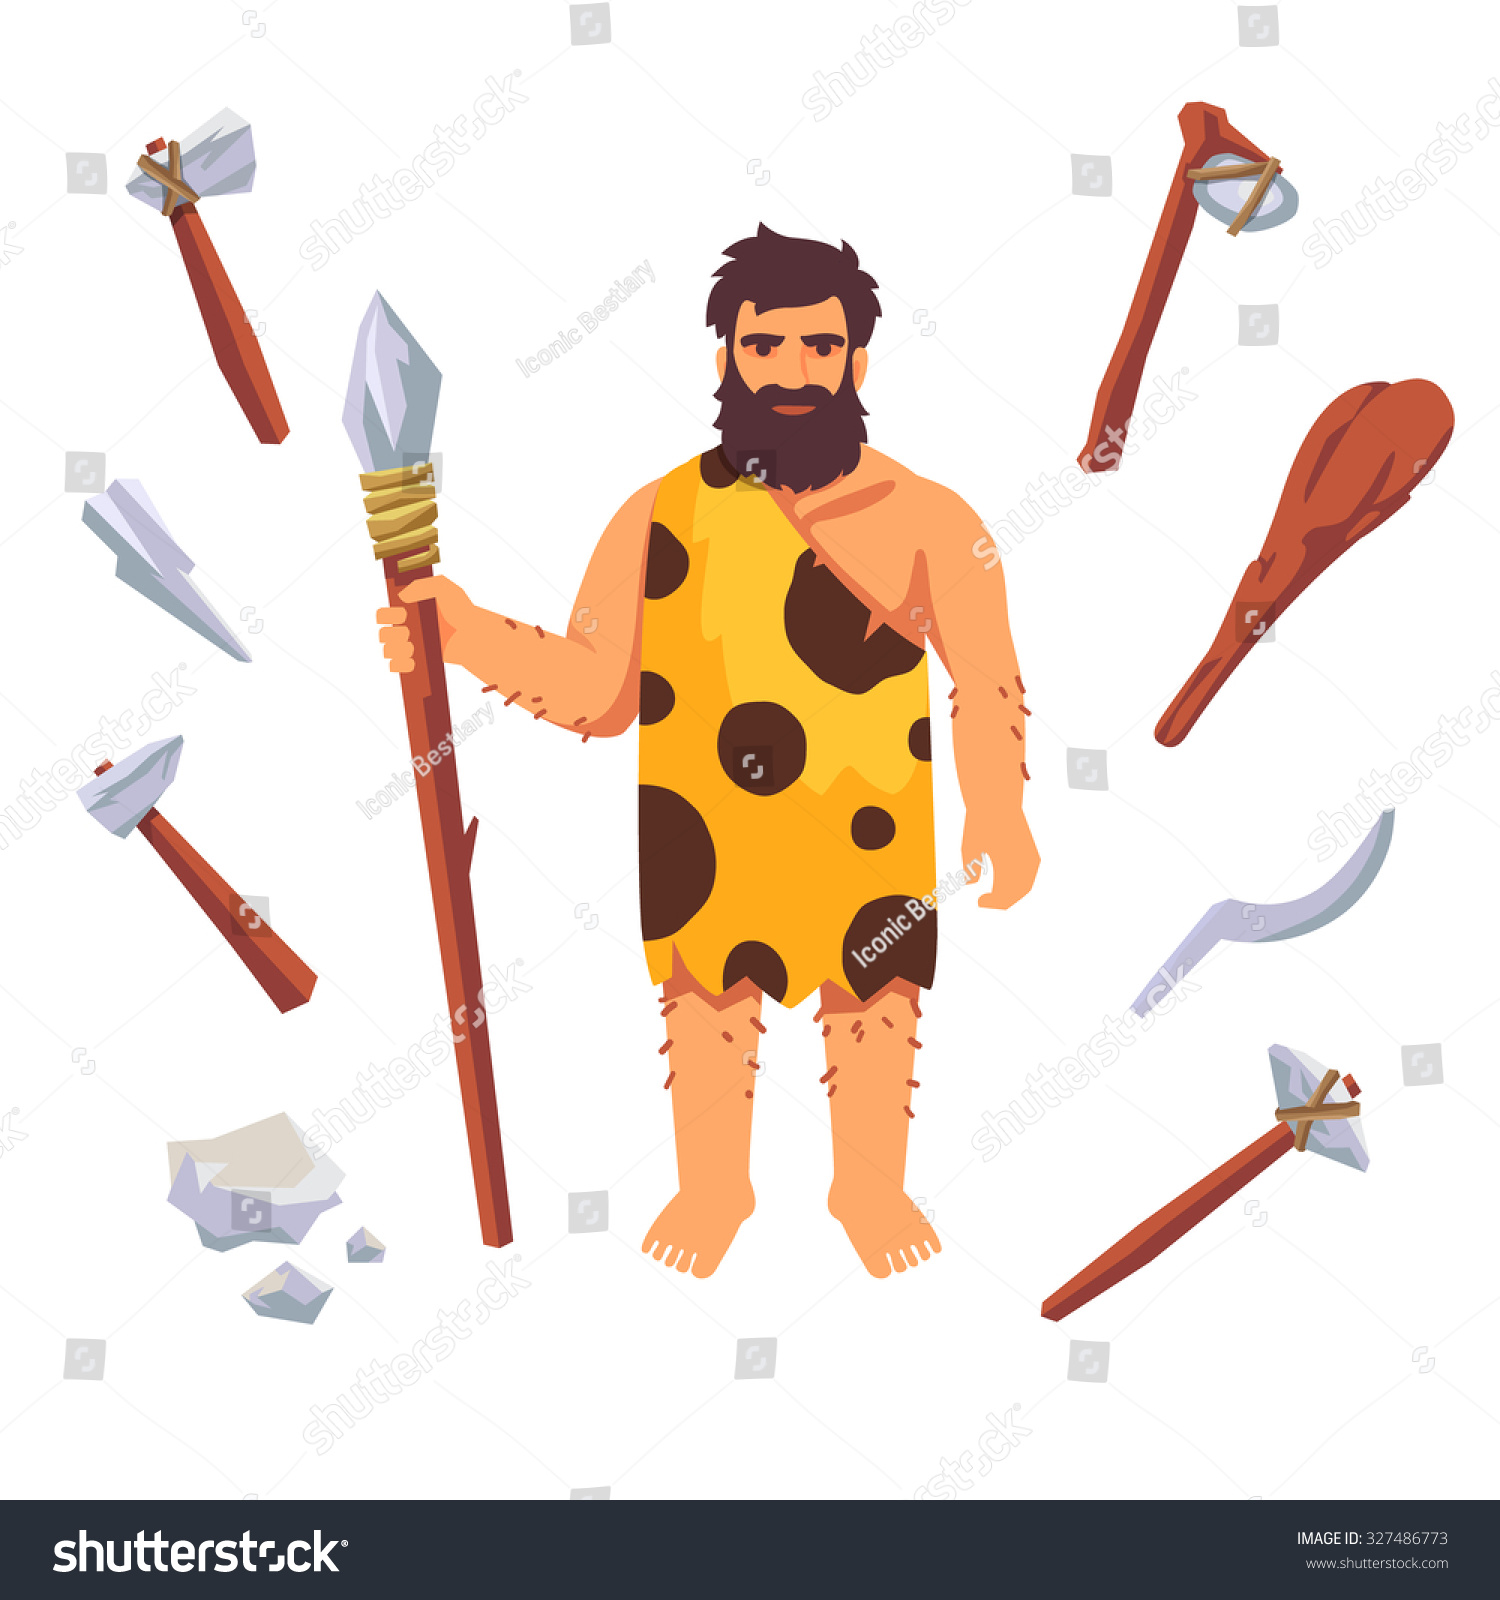 clipart of early man - photo #49